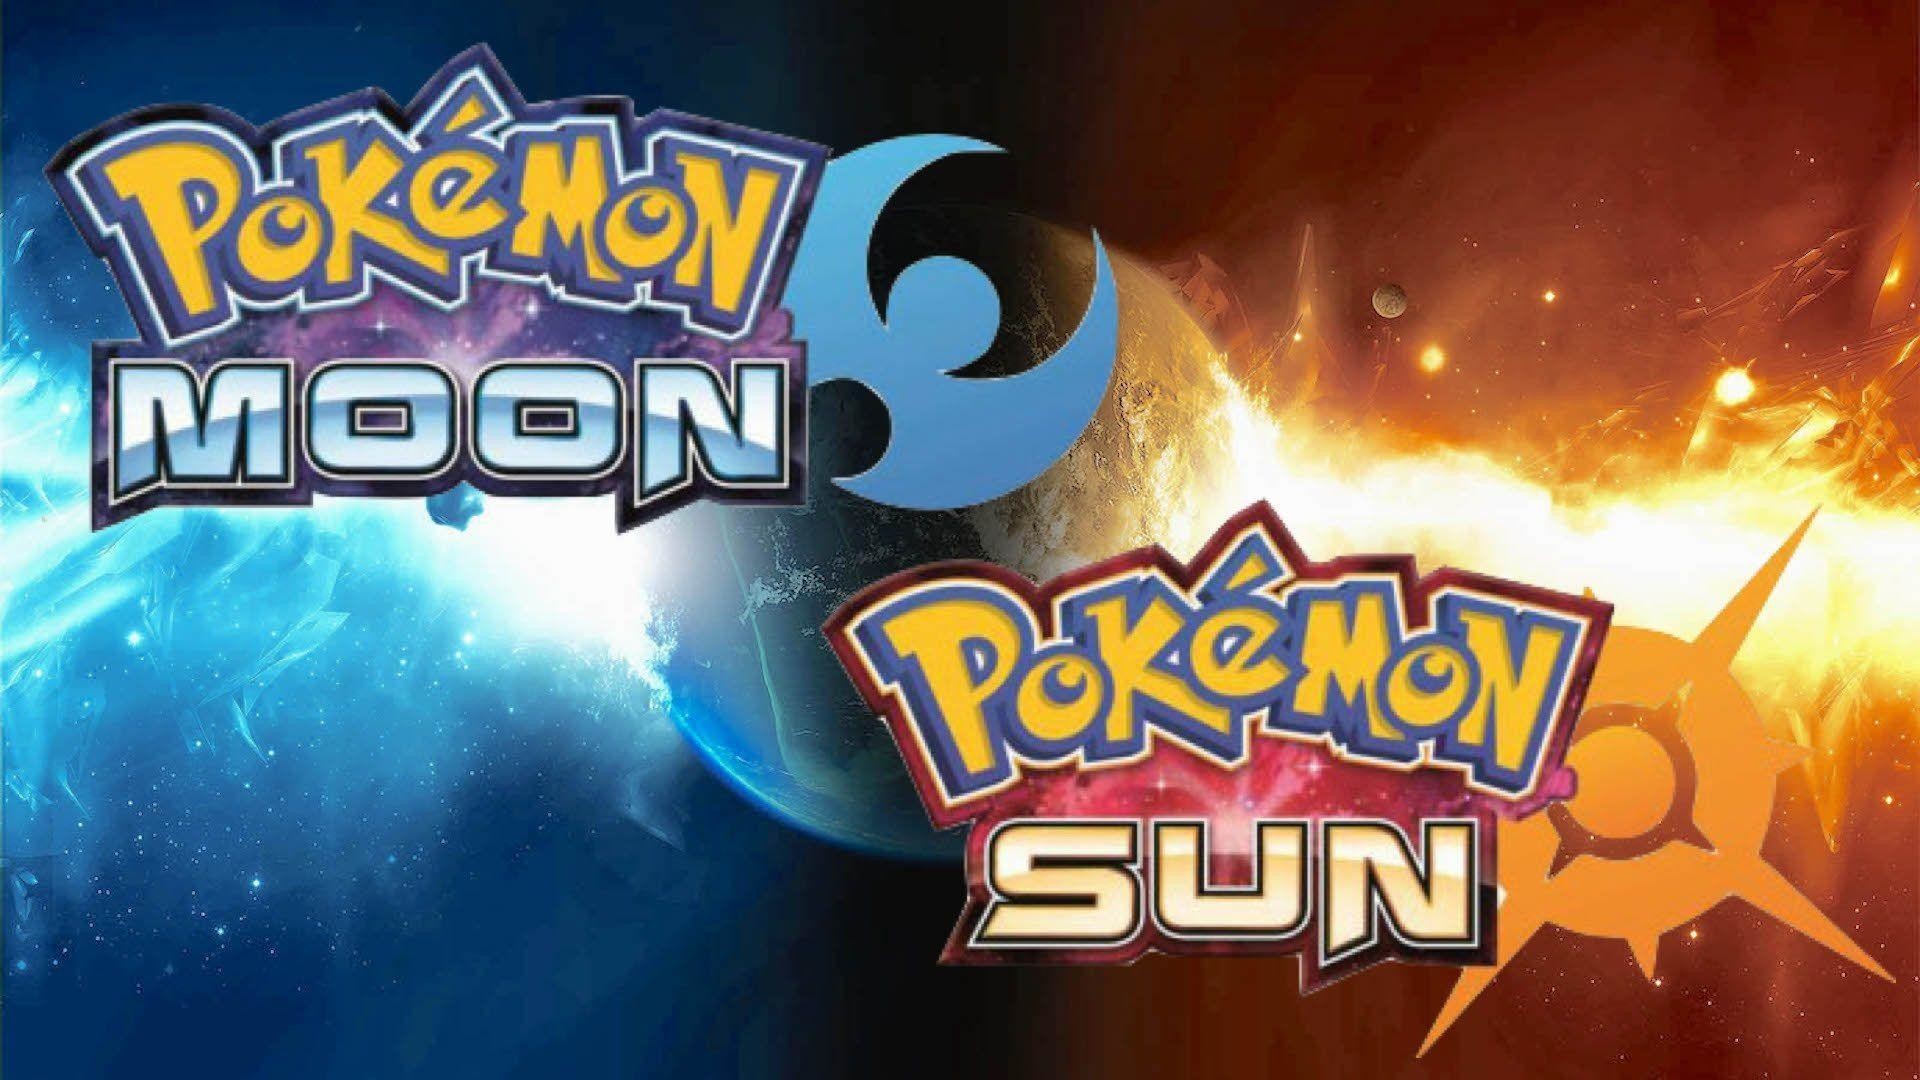 1920x1080 pokemon sun and moon wallpaper images (9) - HD Wallpapers Buzz